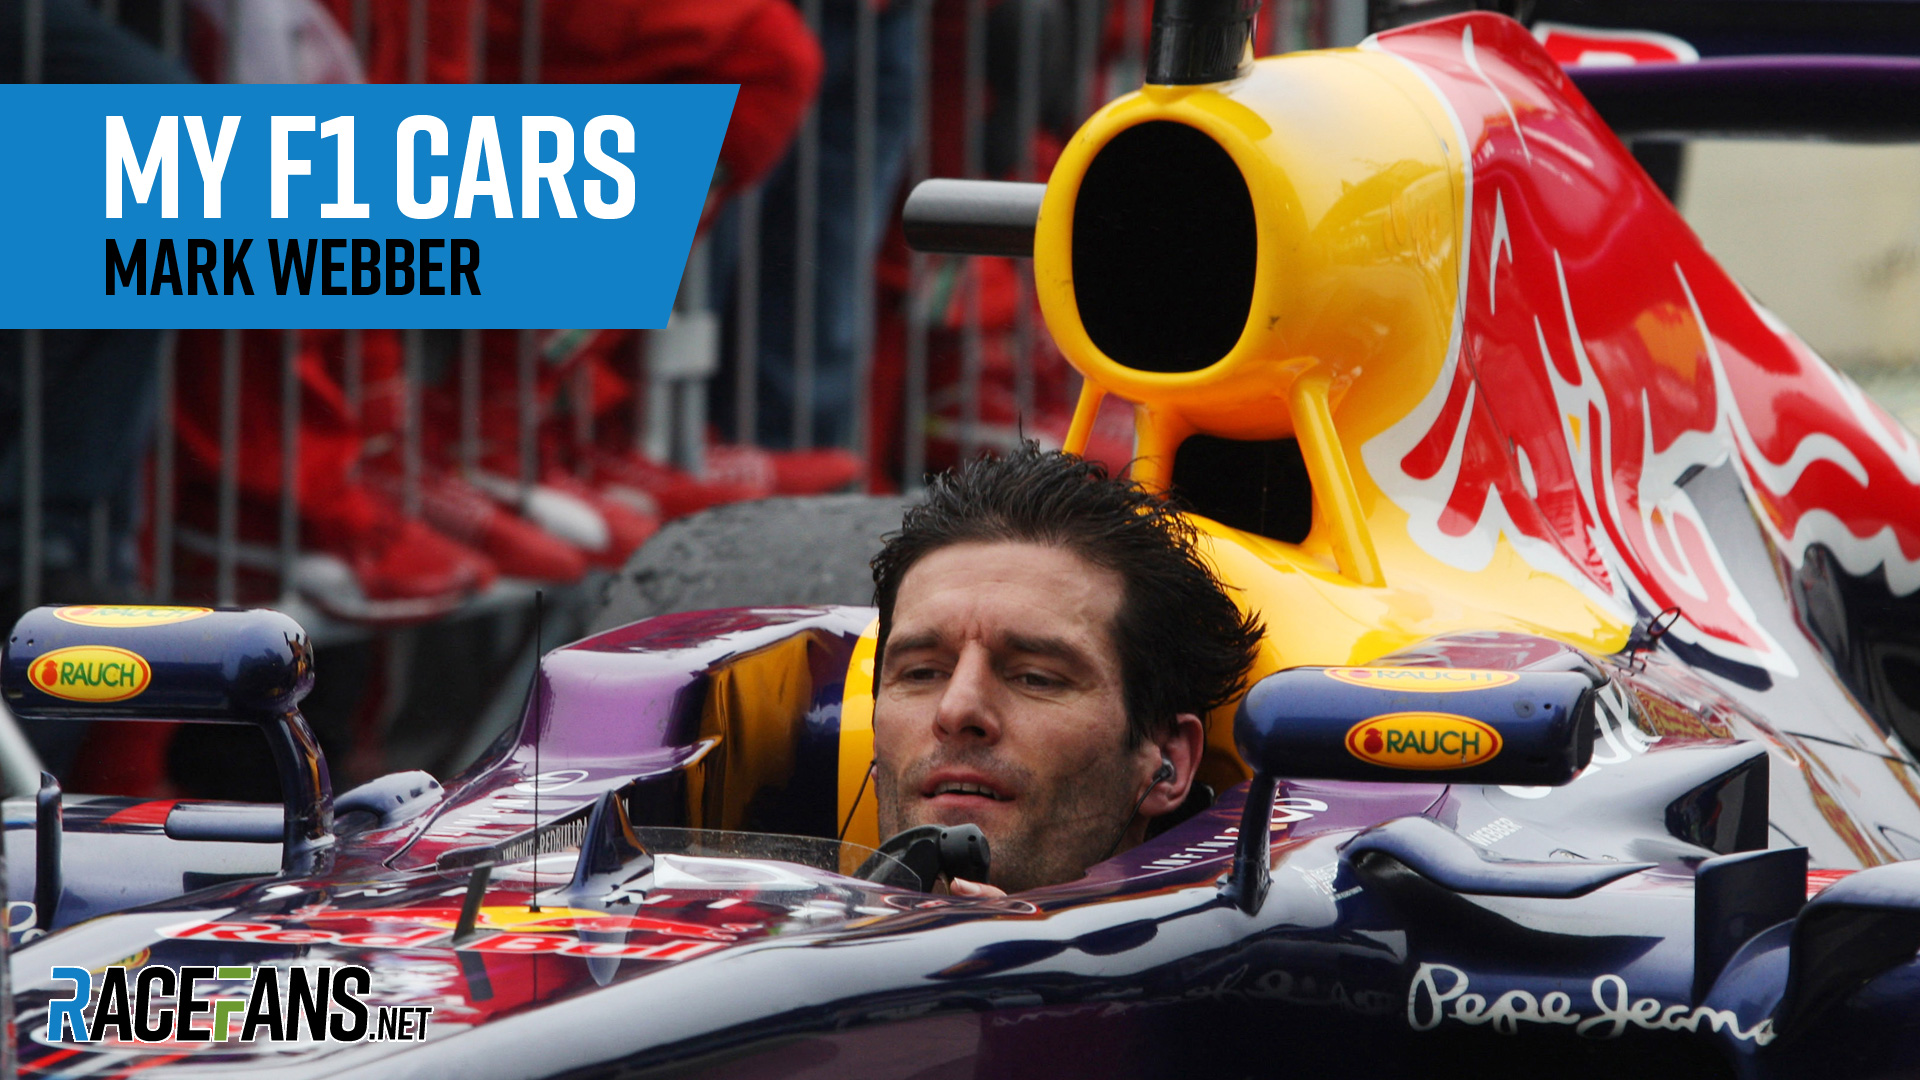 åbning betale sig Tigge My F1 Cars: Mark Webber's route from Minardi to Red Bull · RaceFans